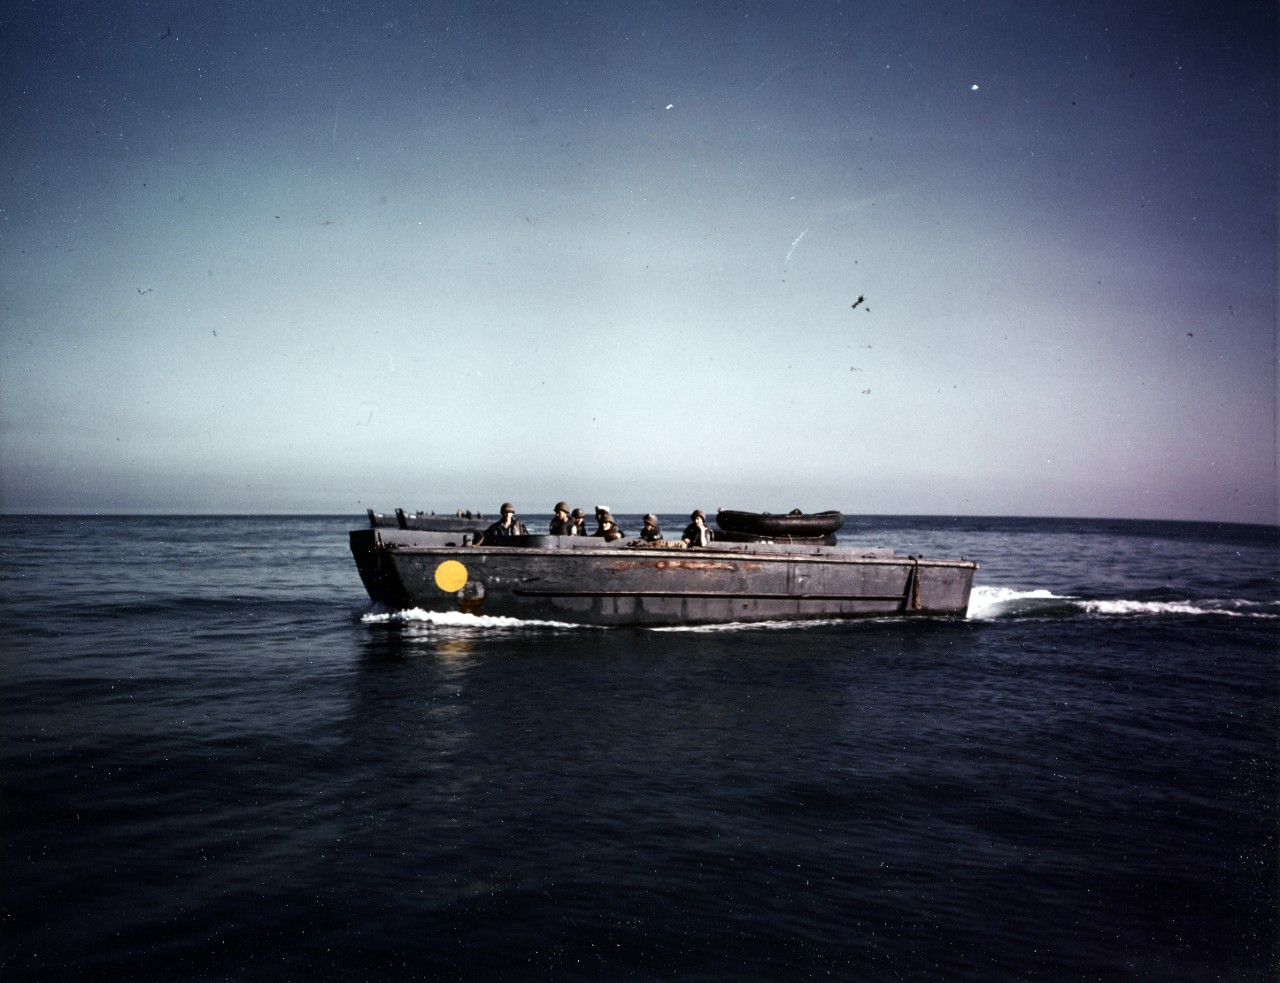 LCP(R) operating off Camp Bradford, Little Creek, Virginia, during amphibious training exercises, circa 1943-1944. Note rubber inflatable boats it is carrying.